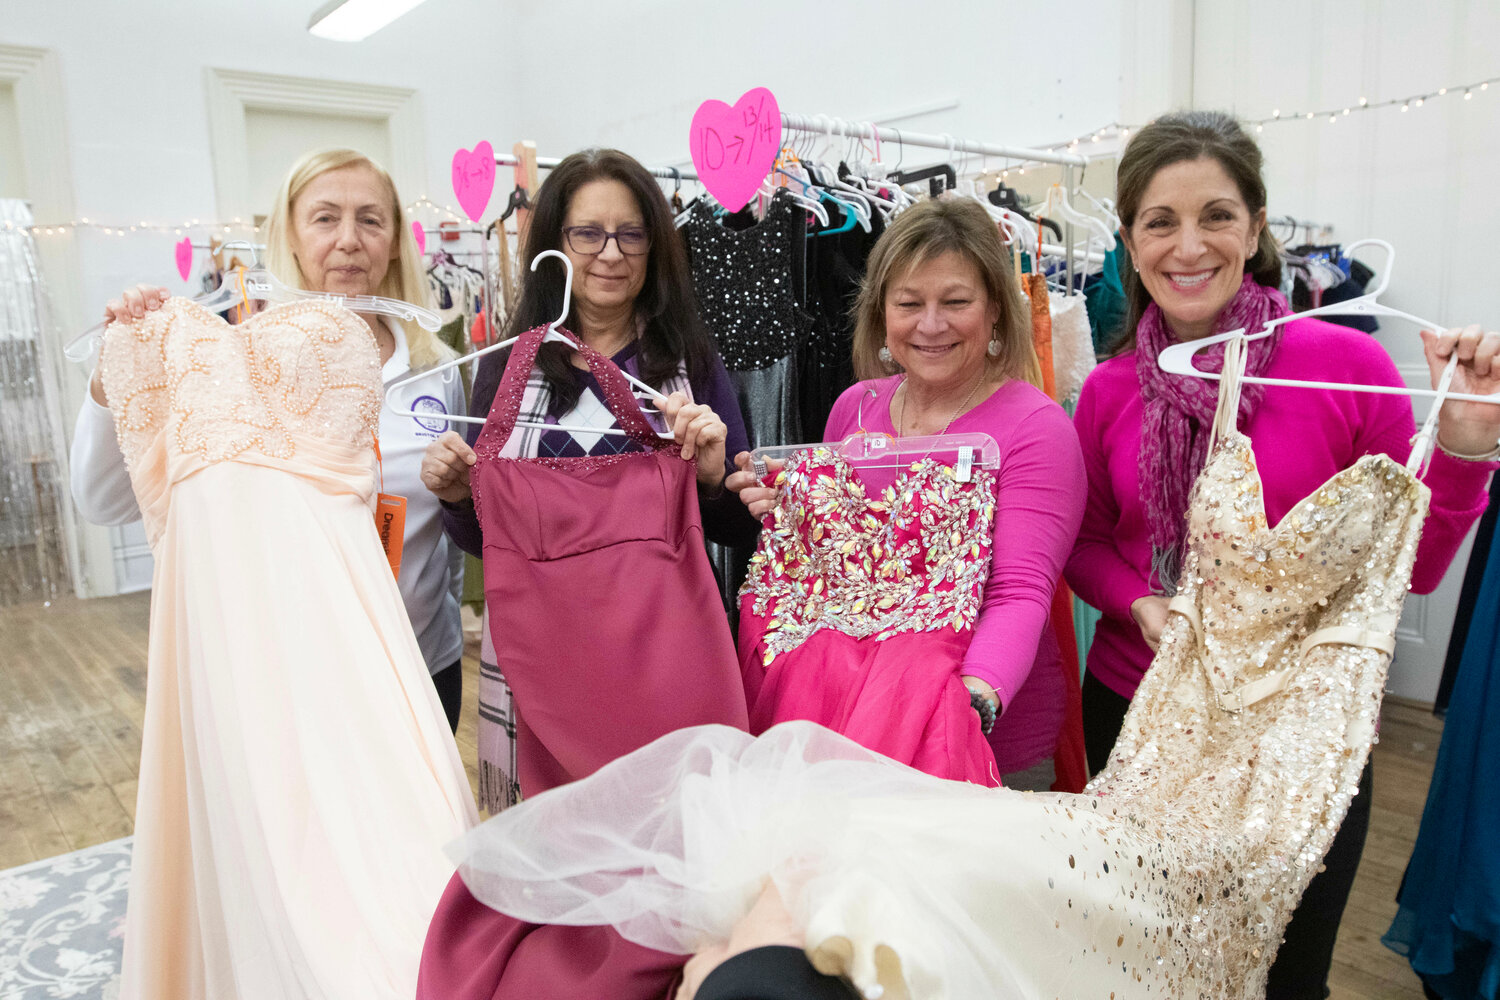 Cathy Keighley (left), Michelle Medeiros, Gina DiSano and Deb Coccio hold up prom dresses.